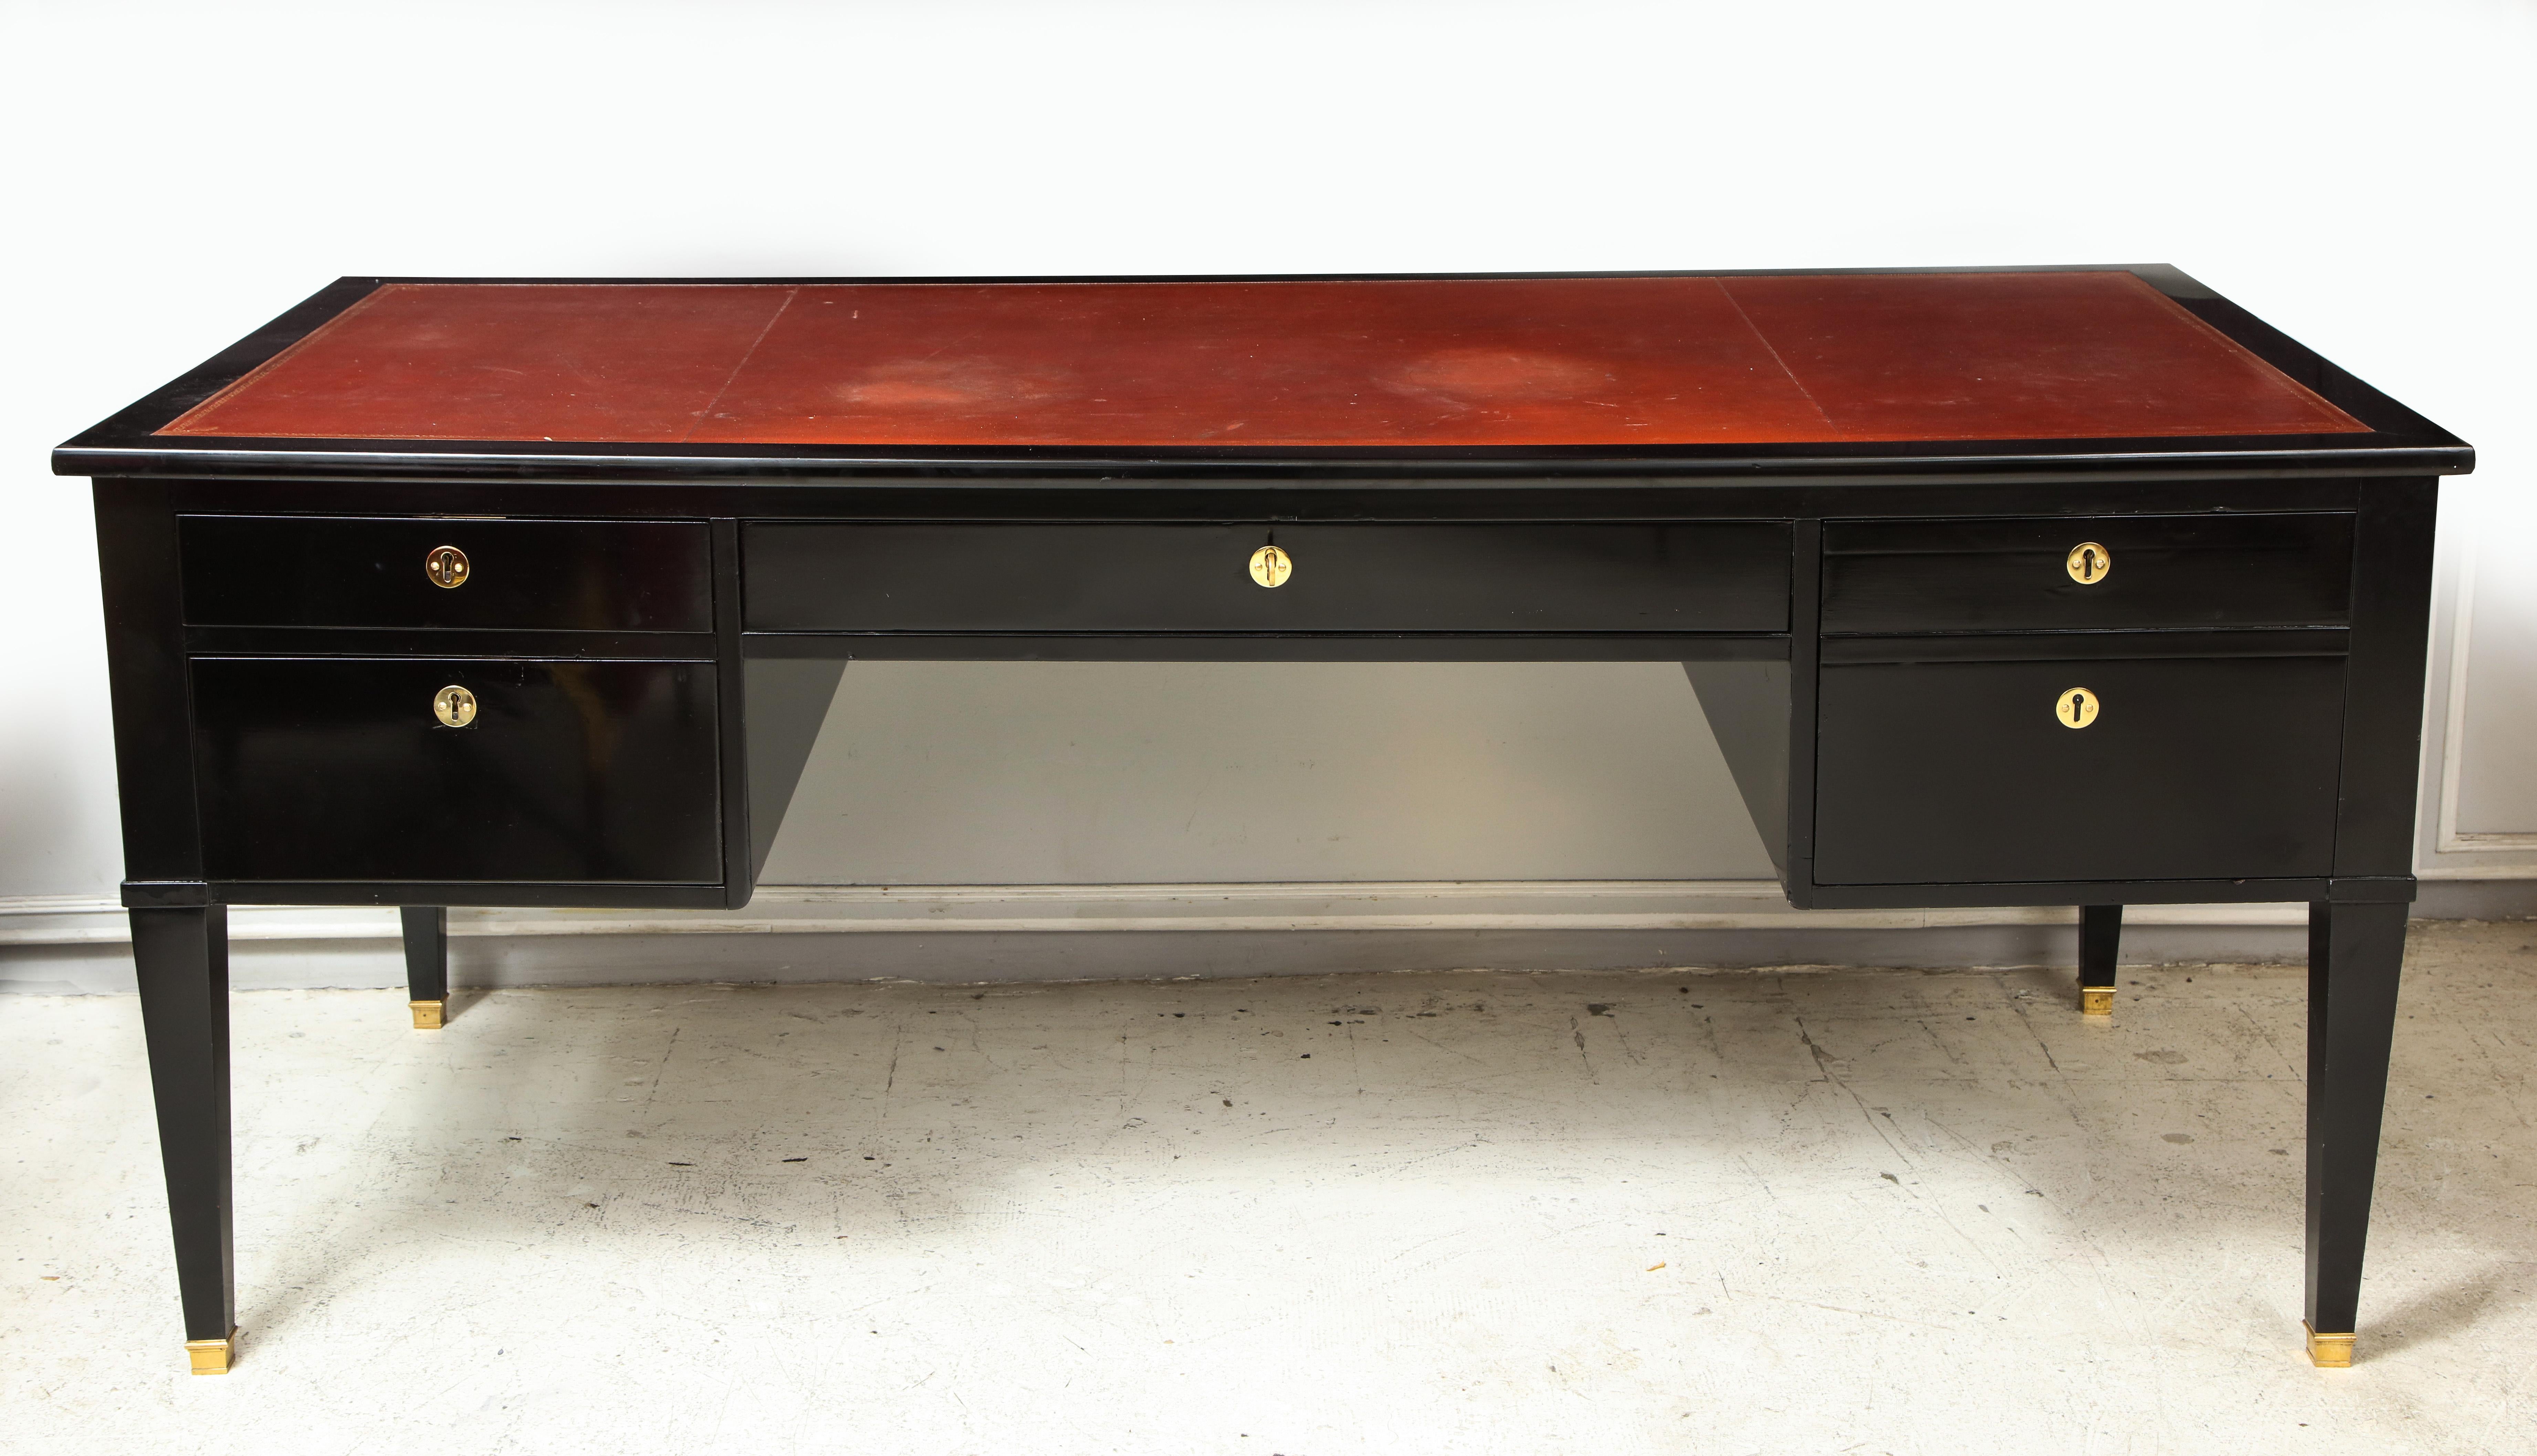 Oversized French Directoire-style ebonized bureau plat desk with leather top on tapered legs ending in bronze sabots. This desk features two pull-out extensions and four central drawers.
Each pull-out extension measures: 15 inches.